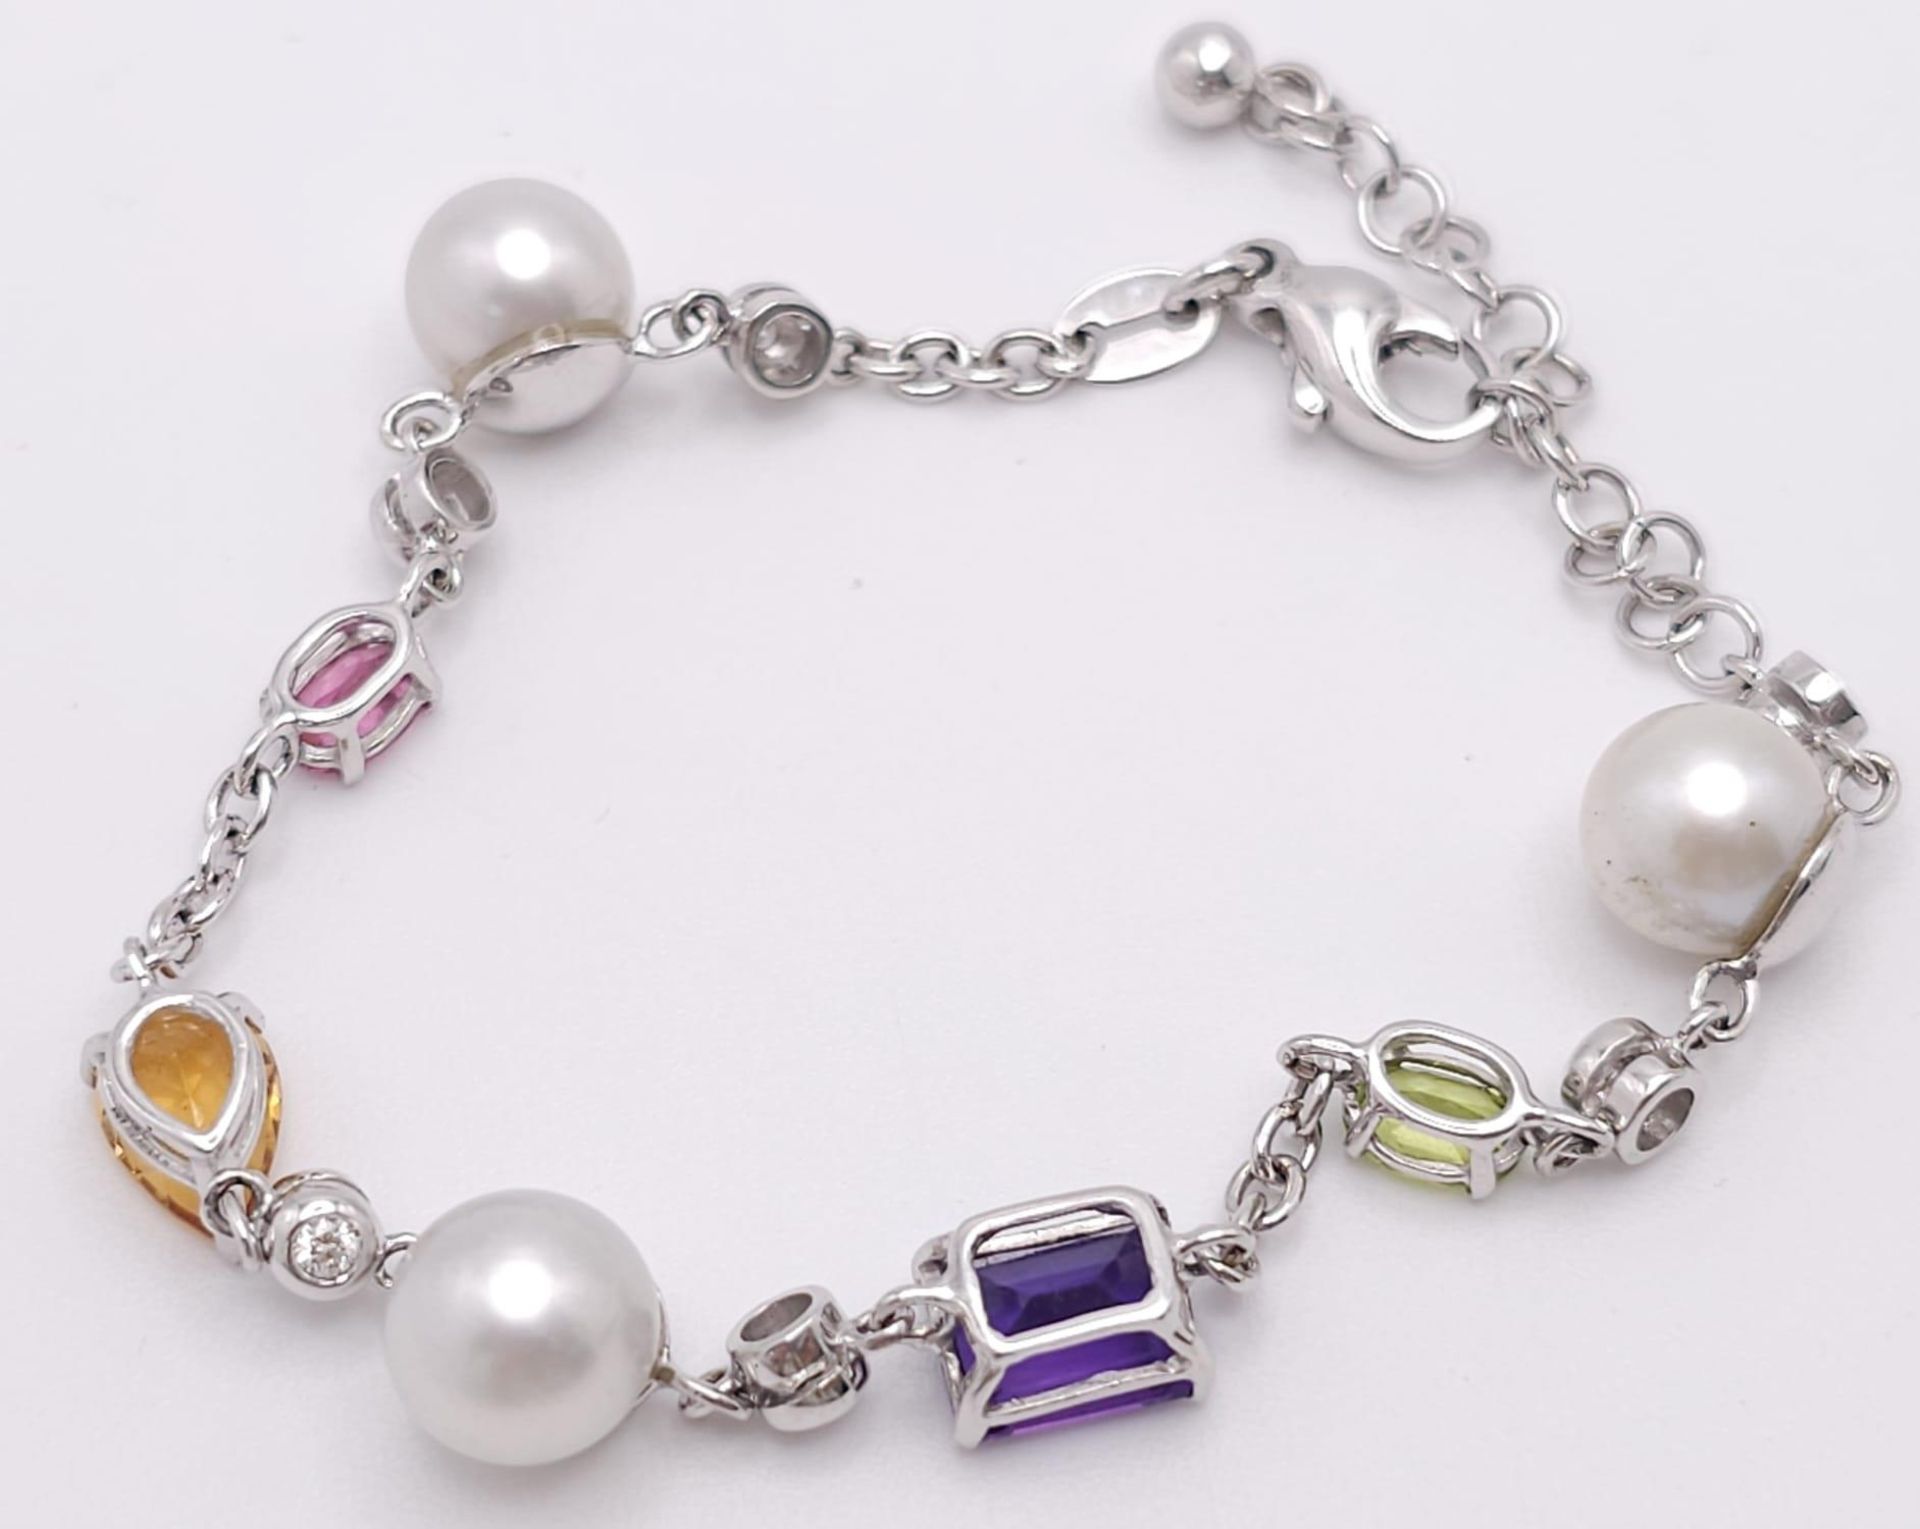 An 18 K white gold chain bracelet with a variety of gemstones (peridot, amethyst, citrine, etc) - Image 4 of 6